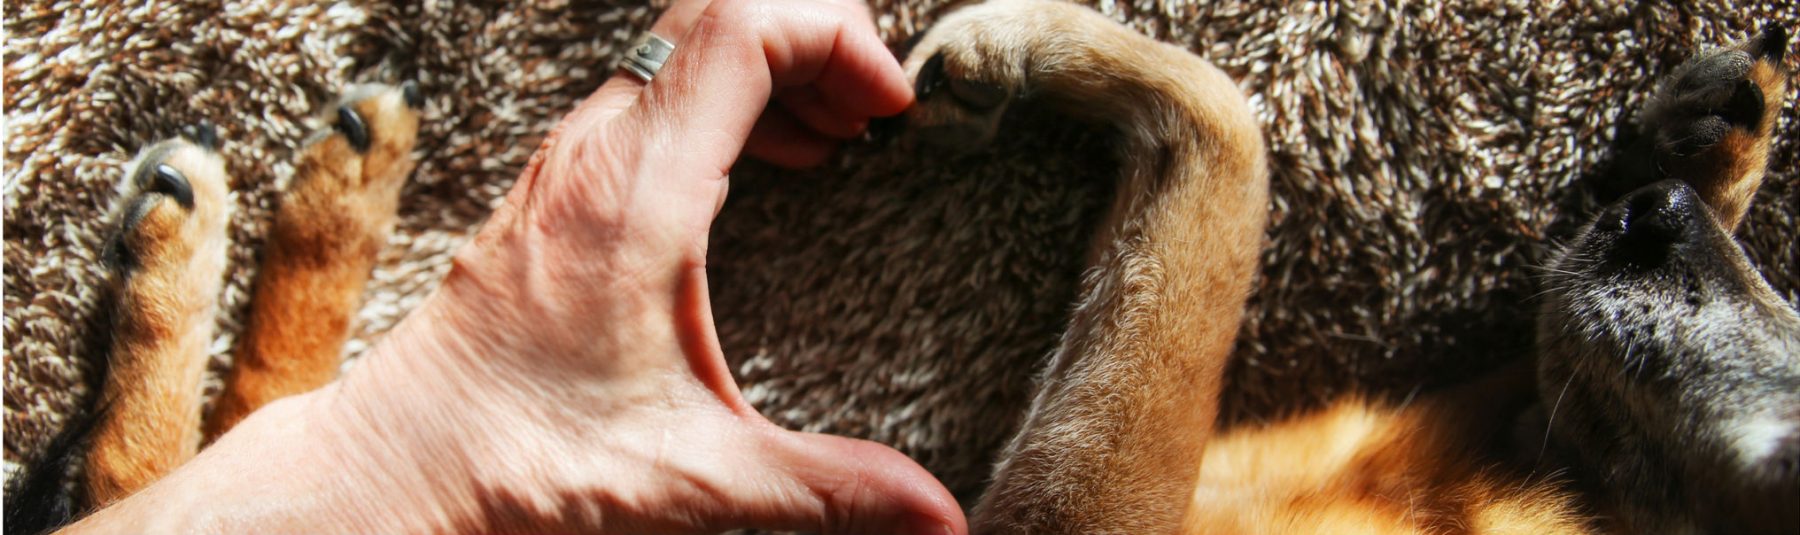 Human hand and dog paw forming a heart shape